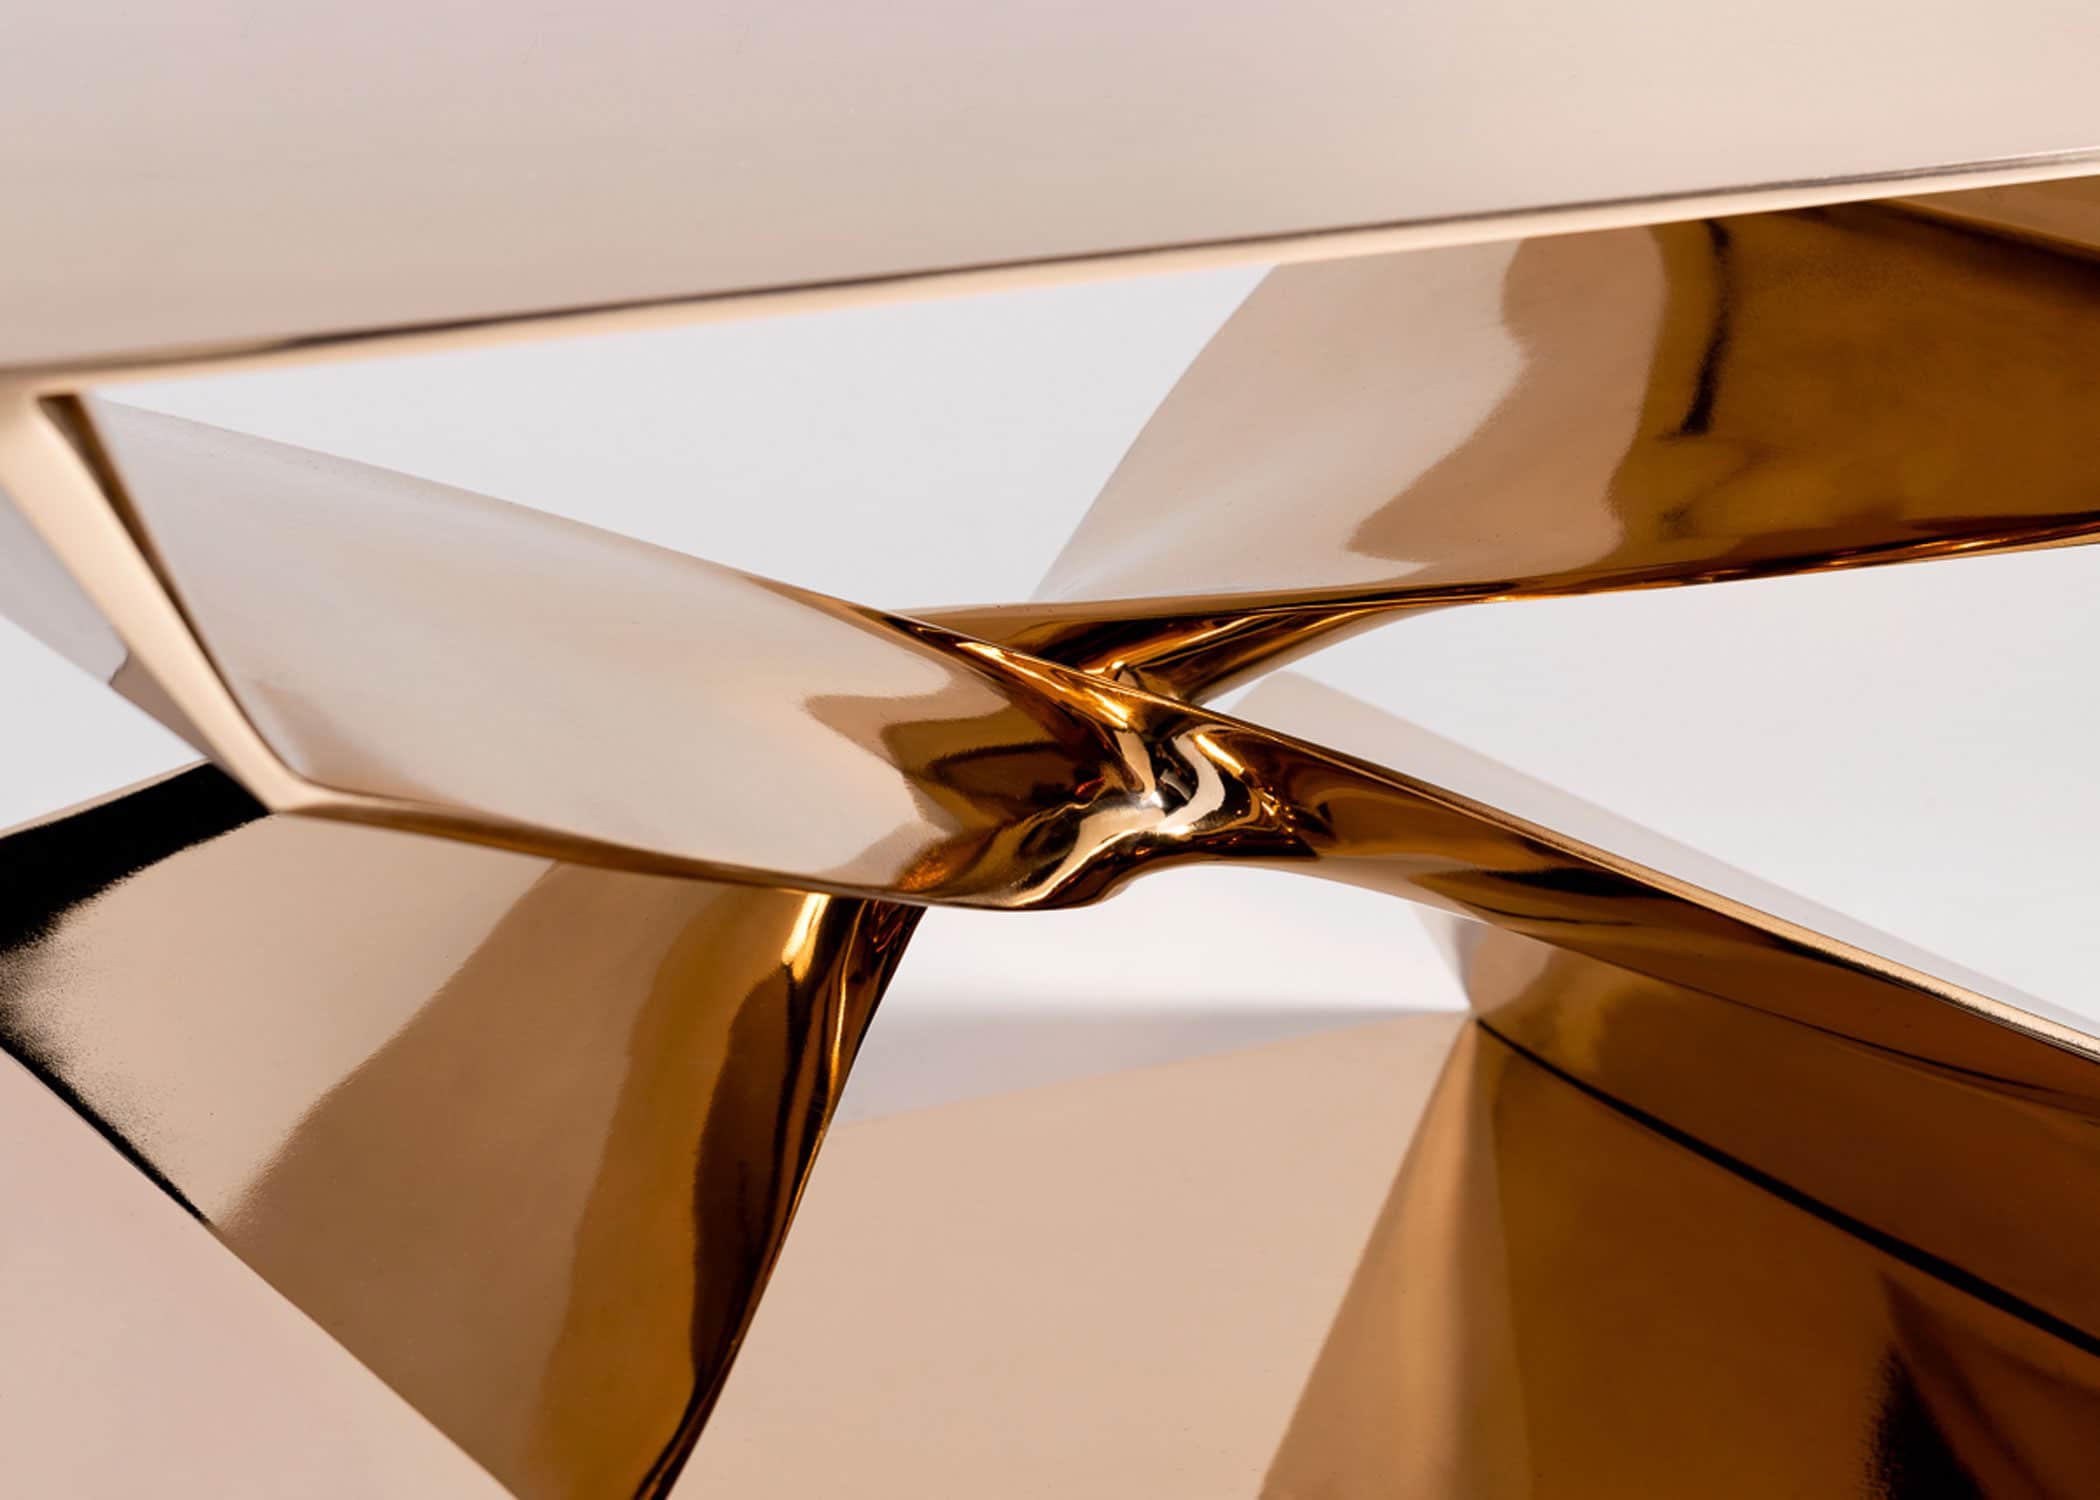 This image shows a close-up detail of the center intersection of the cast X shaped Coffee Table designed by Carol Egan.  The CE24 Cast Silicon bronze X shaped coffee table has a mirror polished finish.   The dimensions of the table are 30"w x 24"d x 18"h. This close-up detailed view illustrates the reflections and the casting details of the center section of the base of the table.